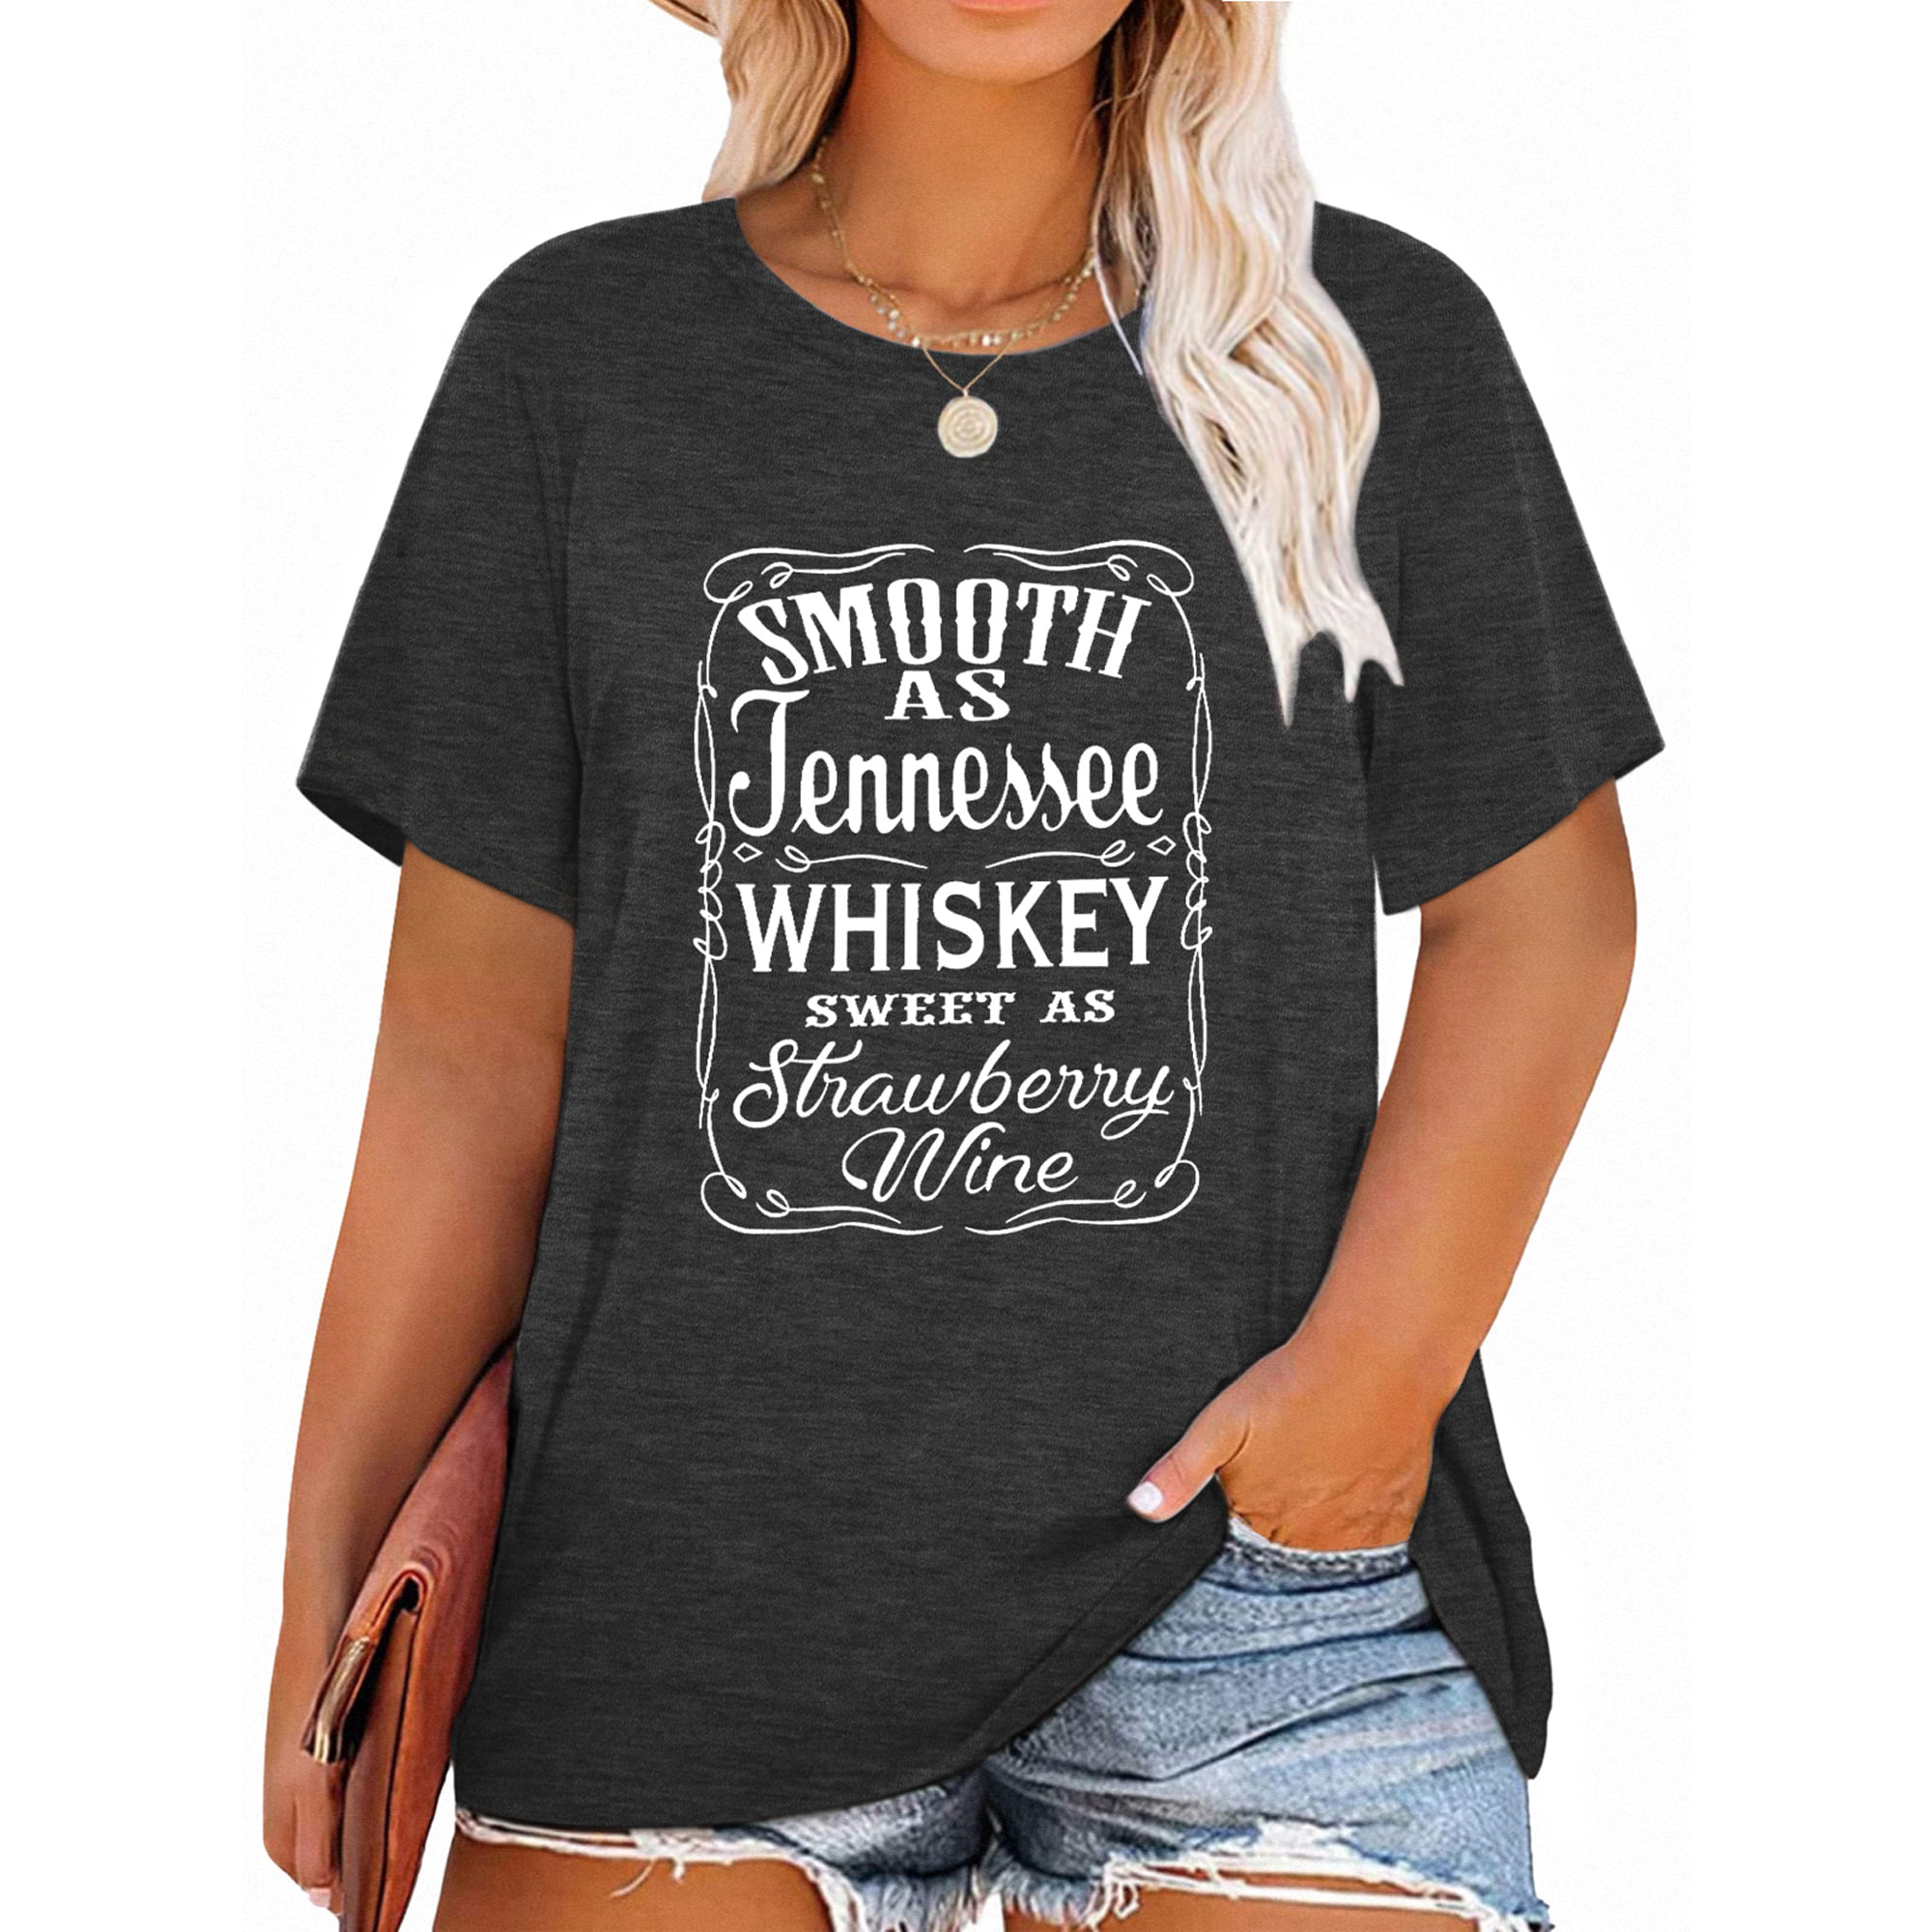 Anbech Womens Music Plus Size Tshirt Graphic Smooth As Tennessee Whiskey Oversized Tops Short Sleeve Tshirt -